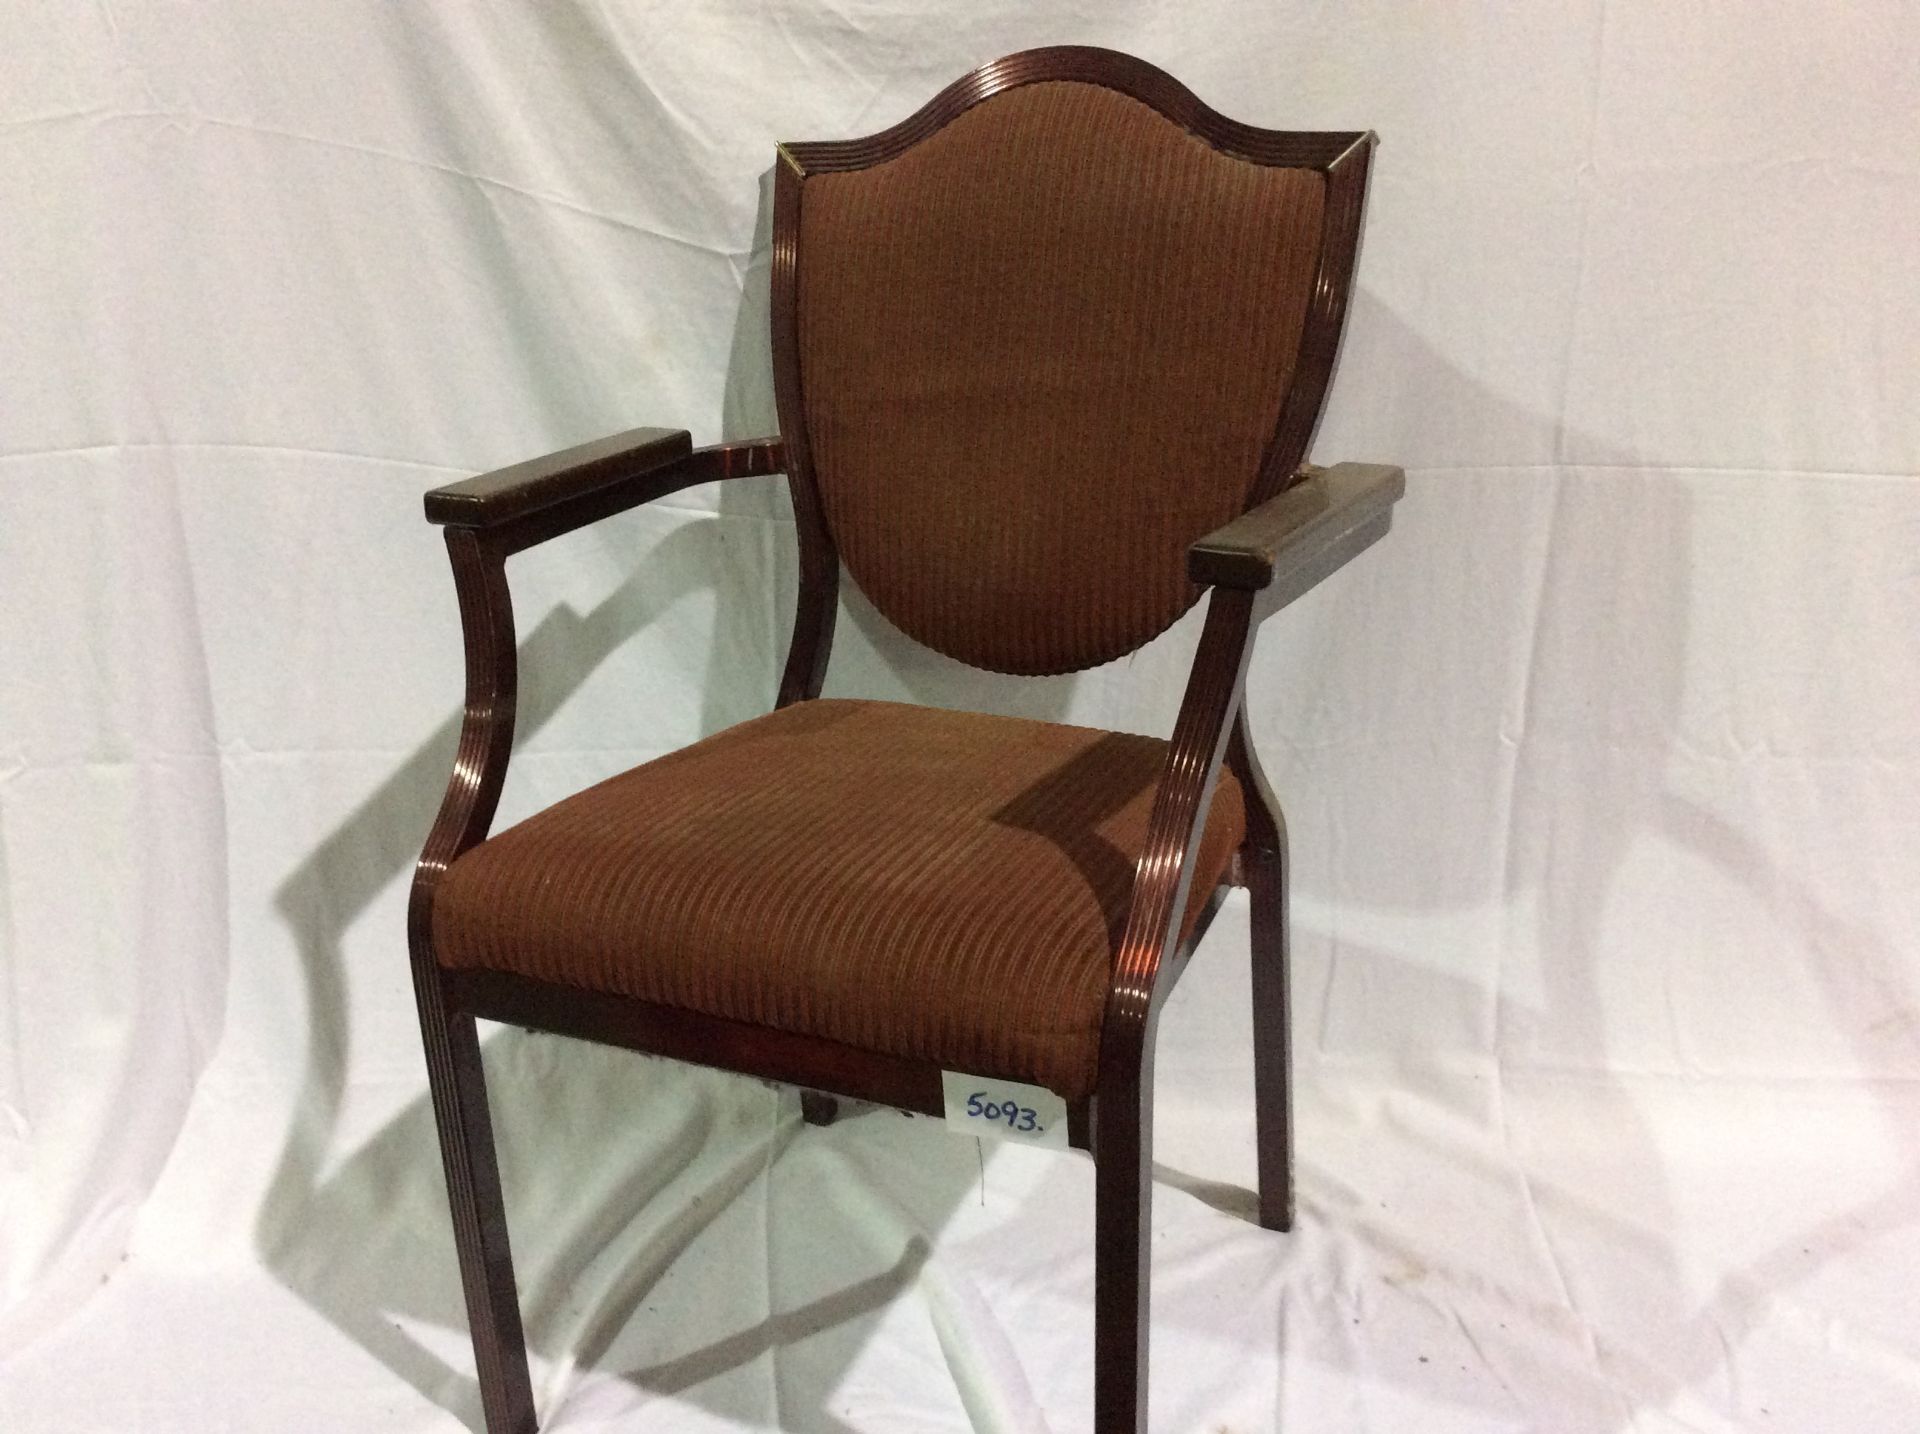 Wood Chair, Cushioned Seat and Back, Arm Rests